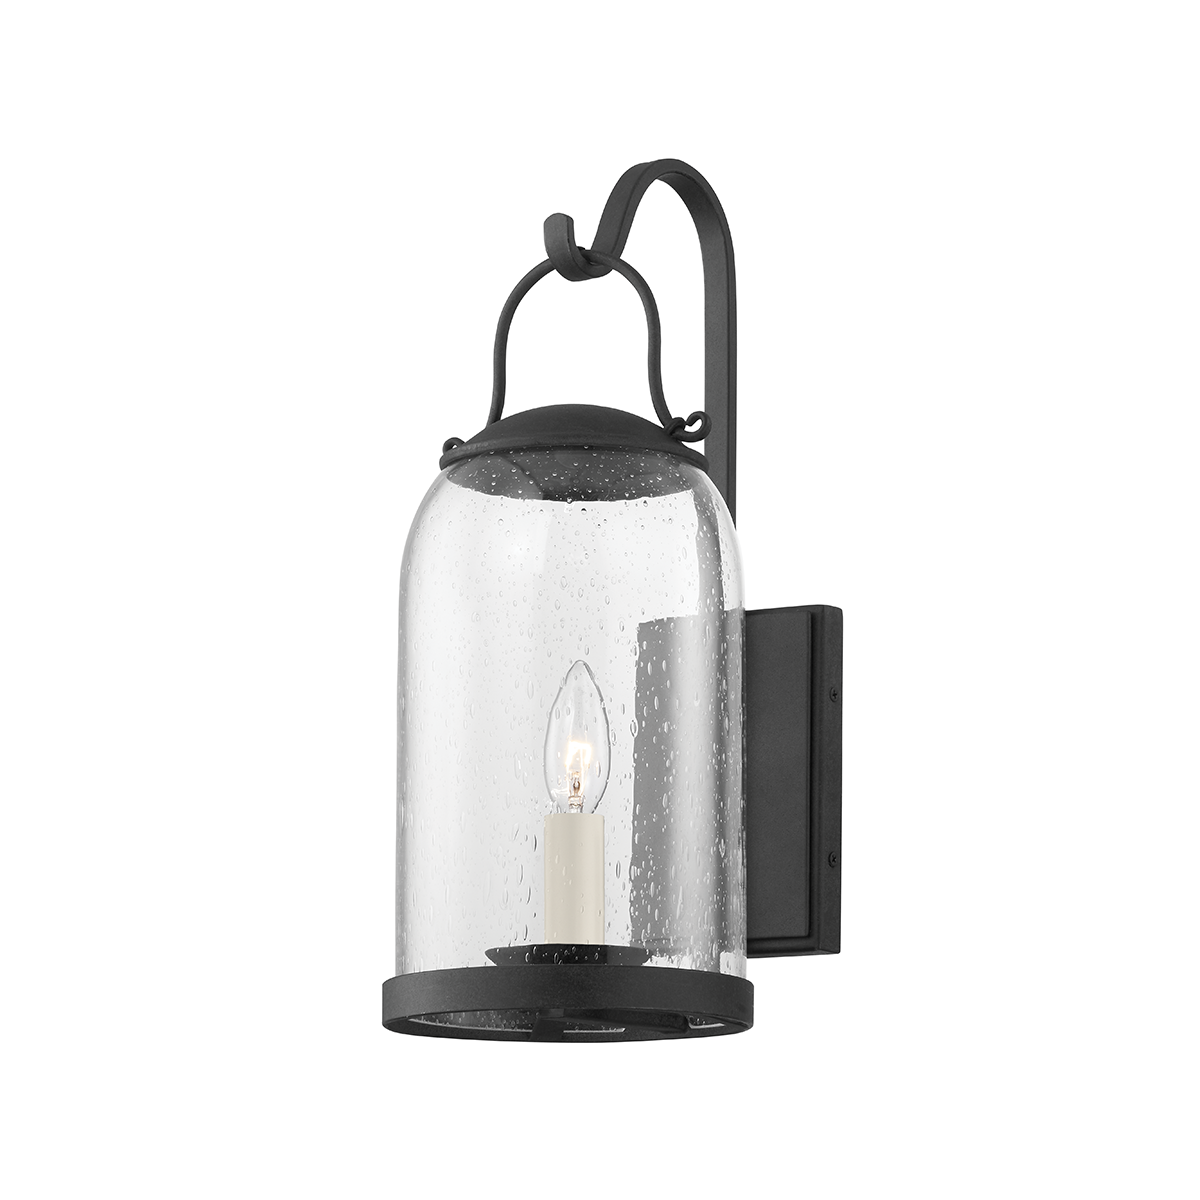 Troy Lighting 1 LIGHT SMALL EXTERIOR WALL SCONCE B5181